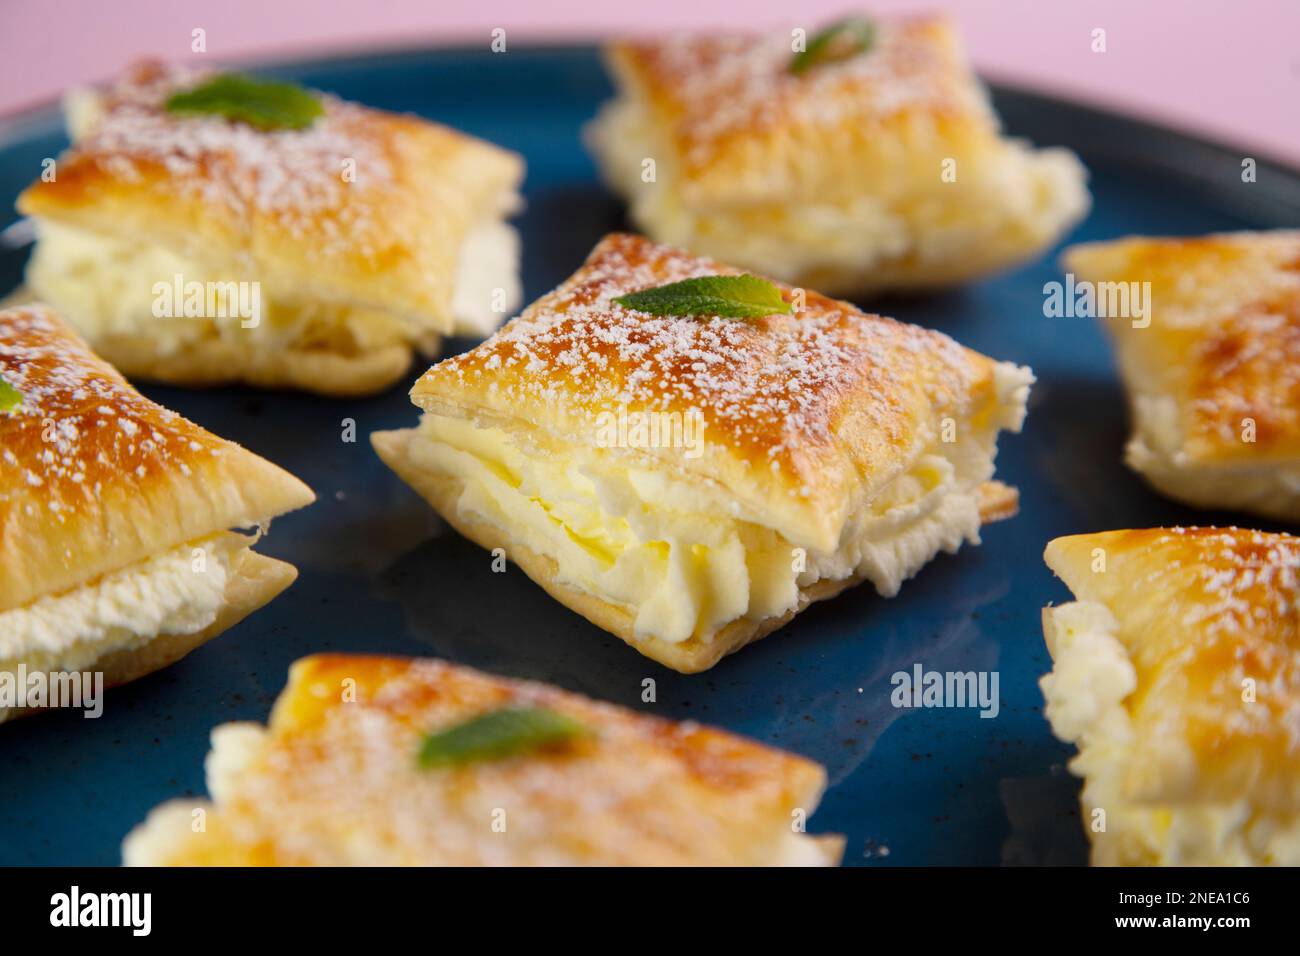 The Miguelitos de La Roda are little cakes made with puff pastry and pastry cream. Stock Photo